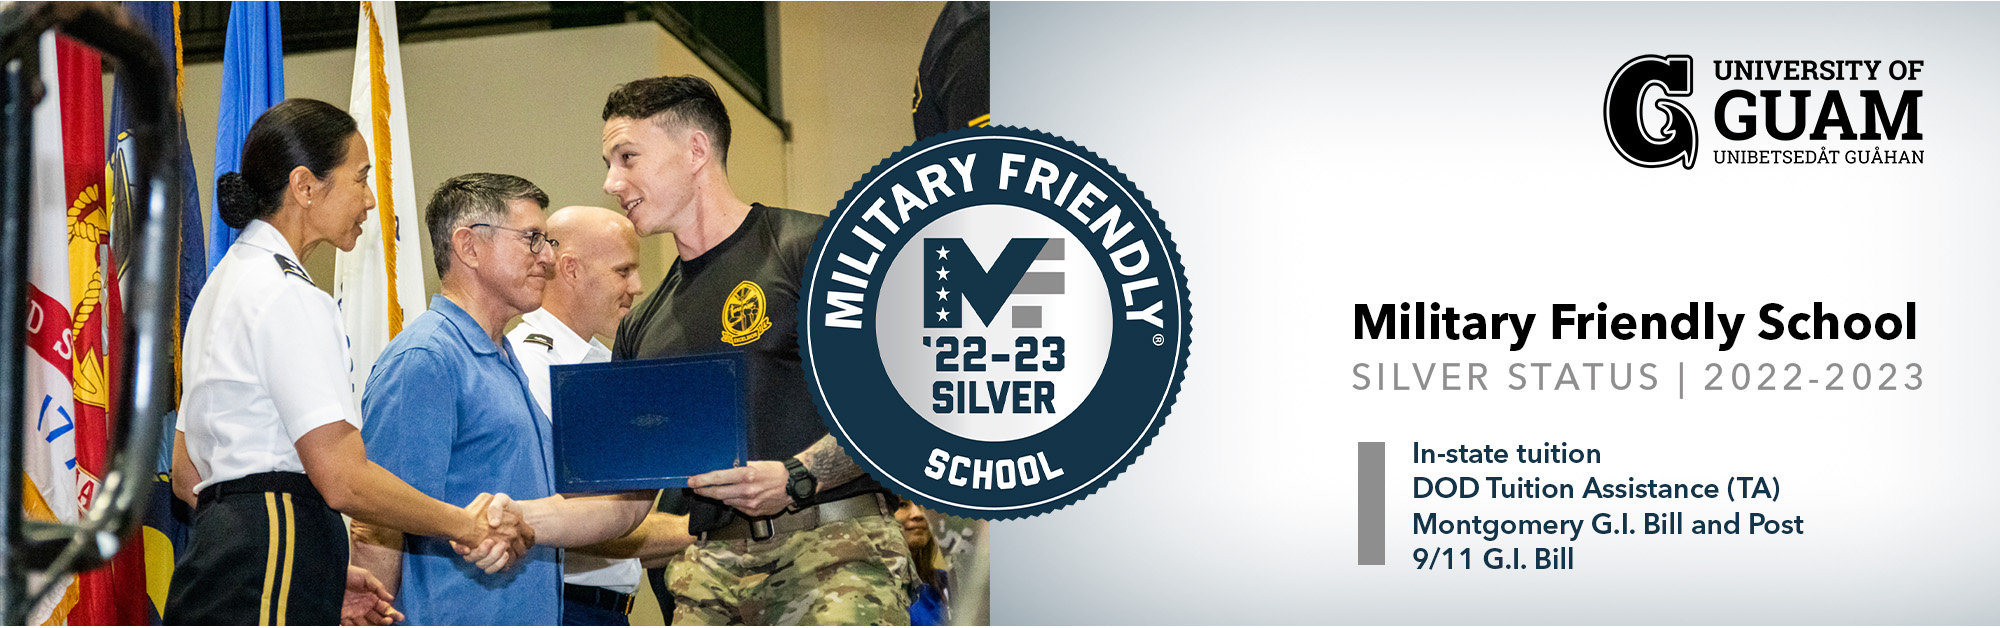 Silver Status 2022-2023, In-state tuition, DOD Tuition Assistance (TA), Montgomery G.I. Bill and Post 9/11 G.I. Bill